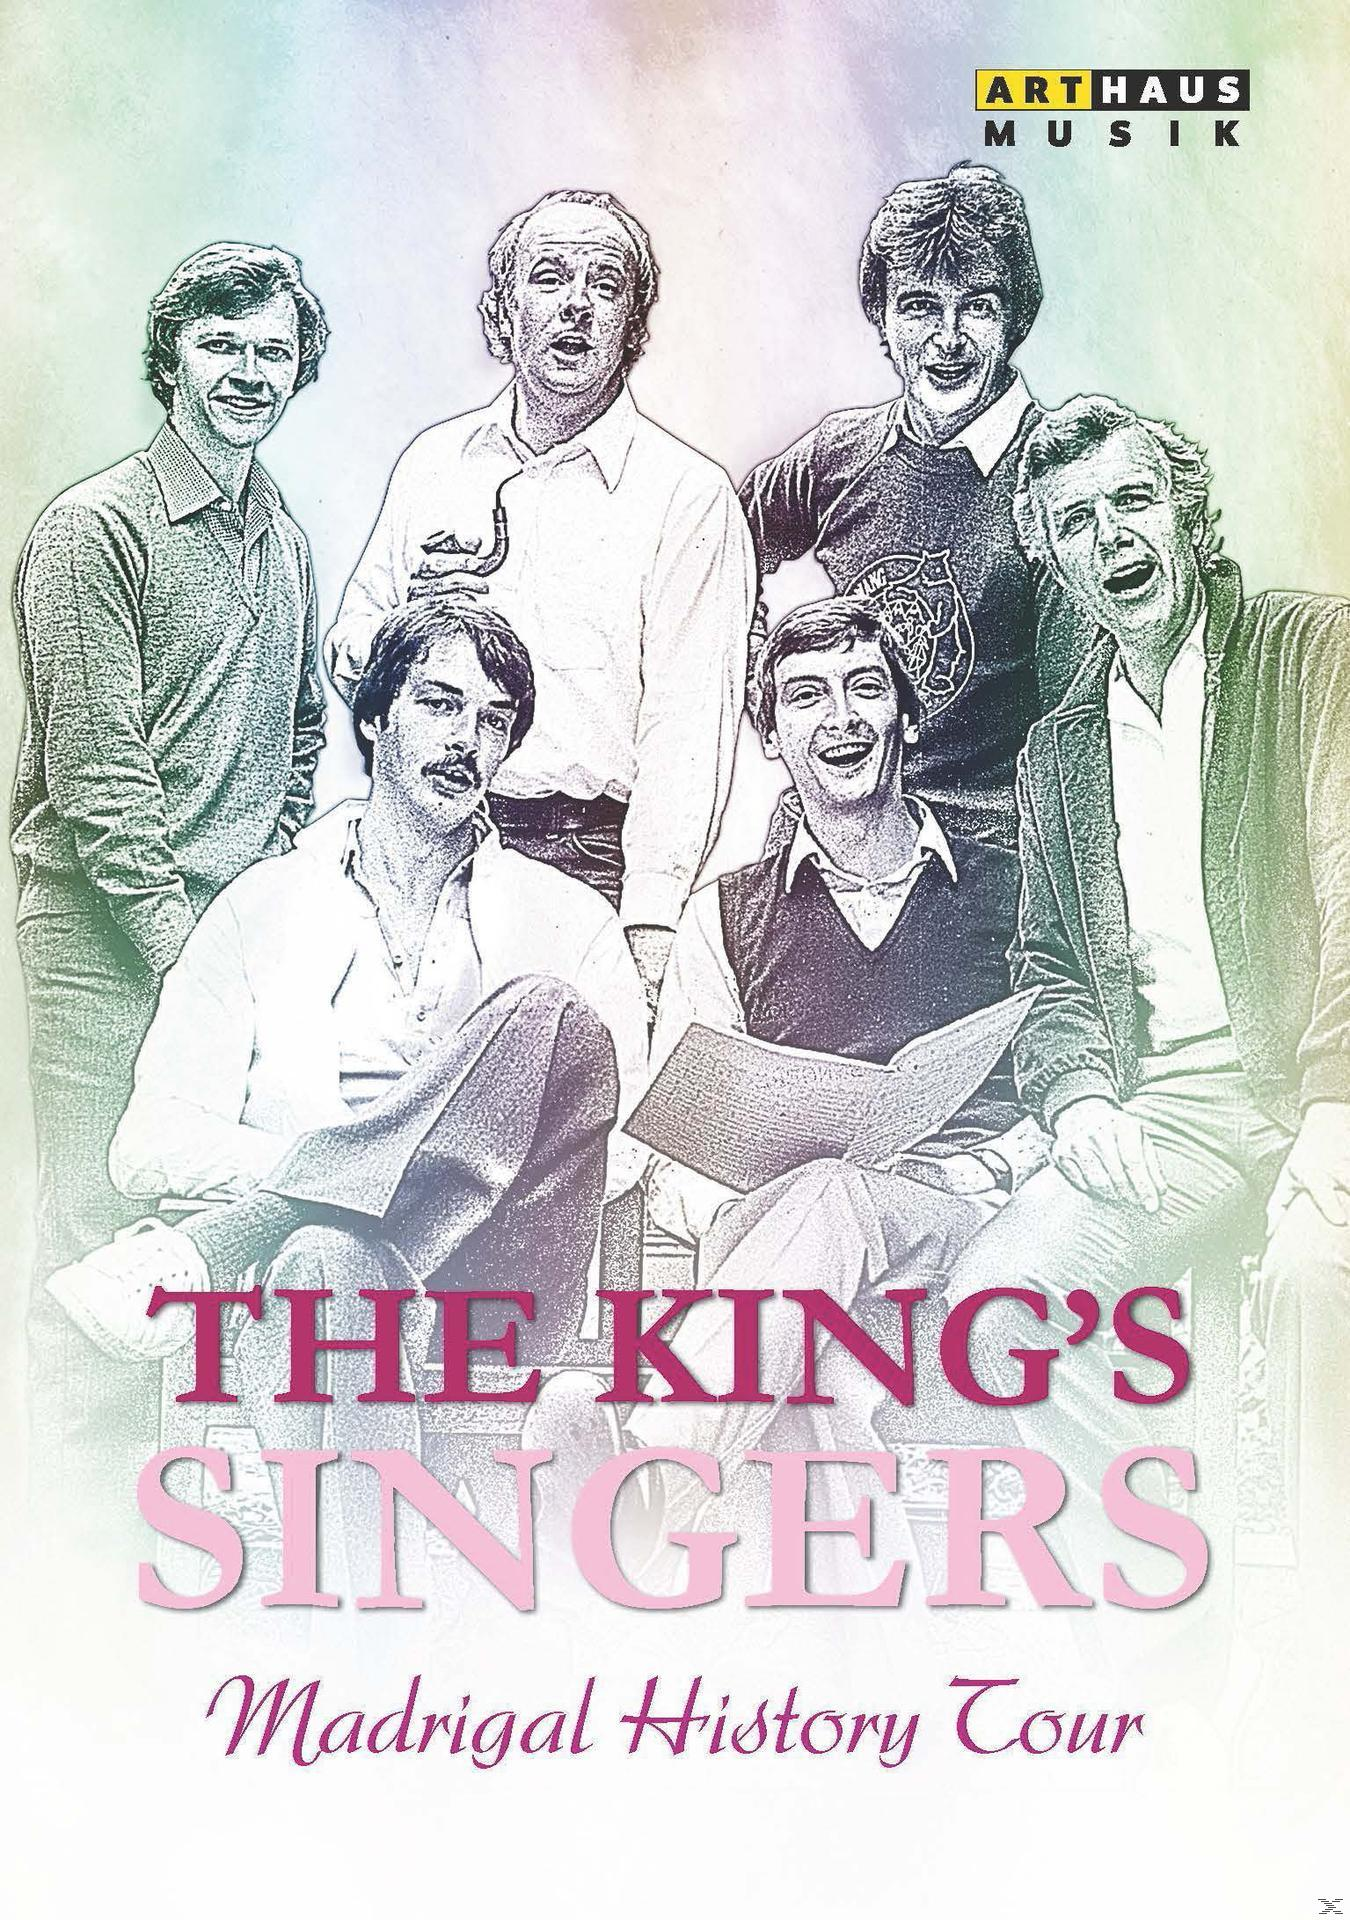 The King\'s (DVD) - - King\'s The Singers Singers